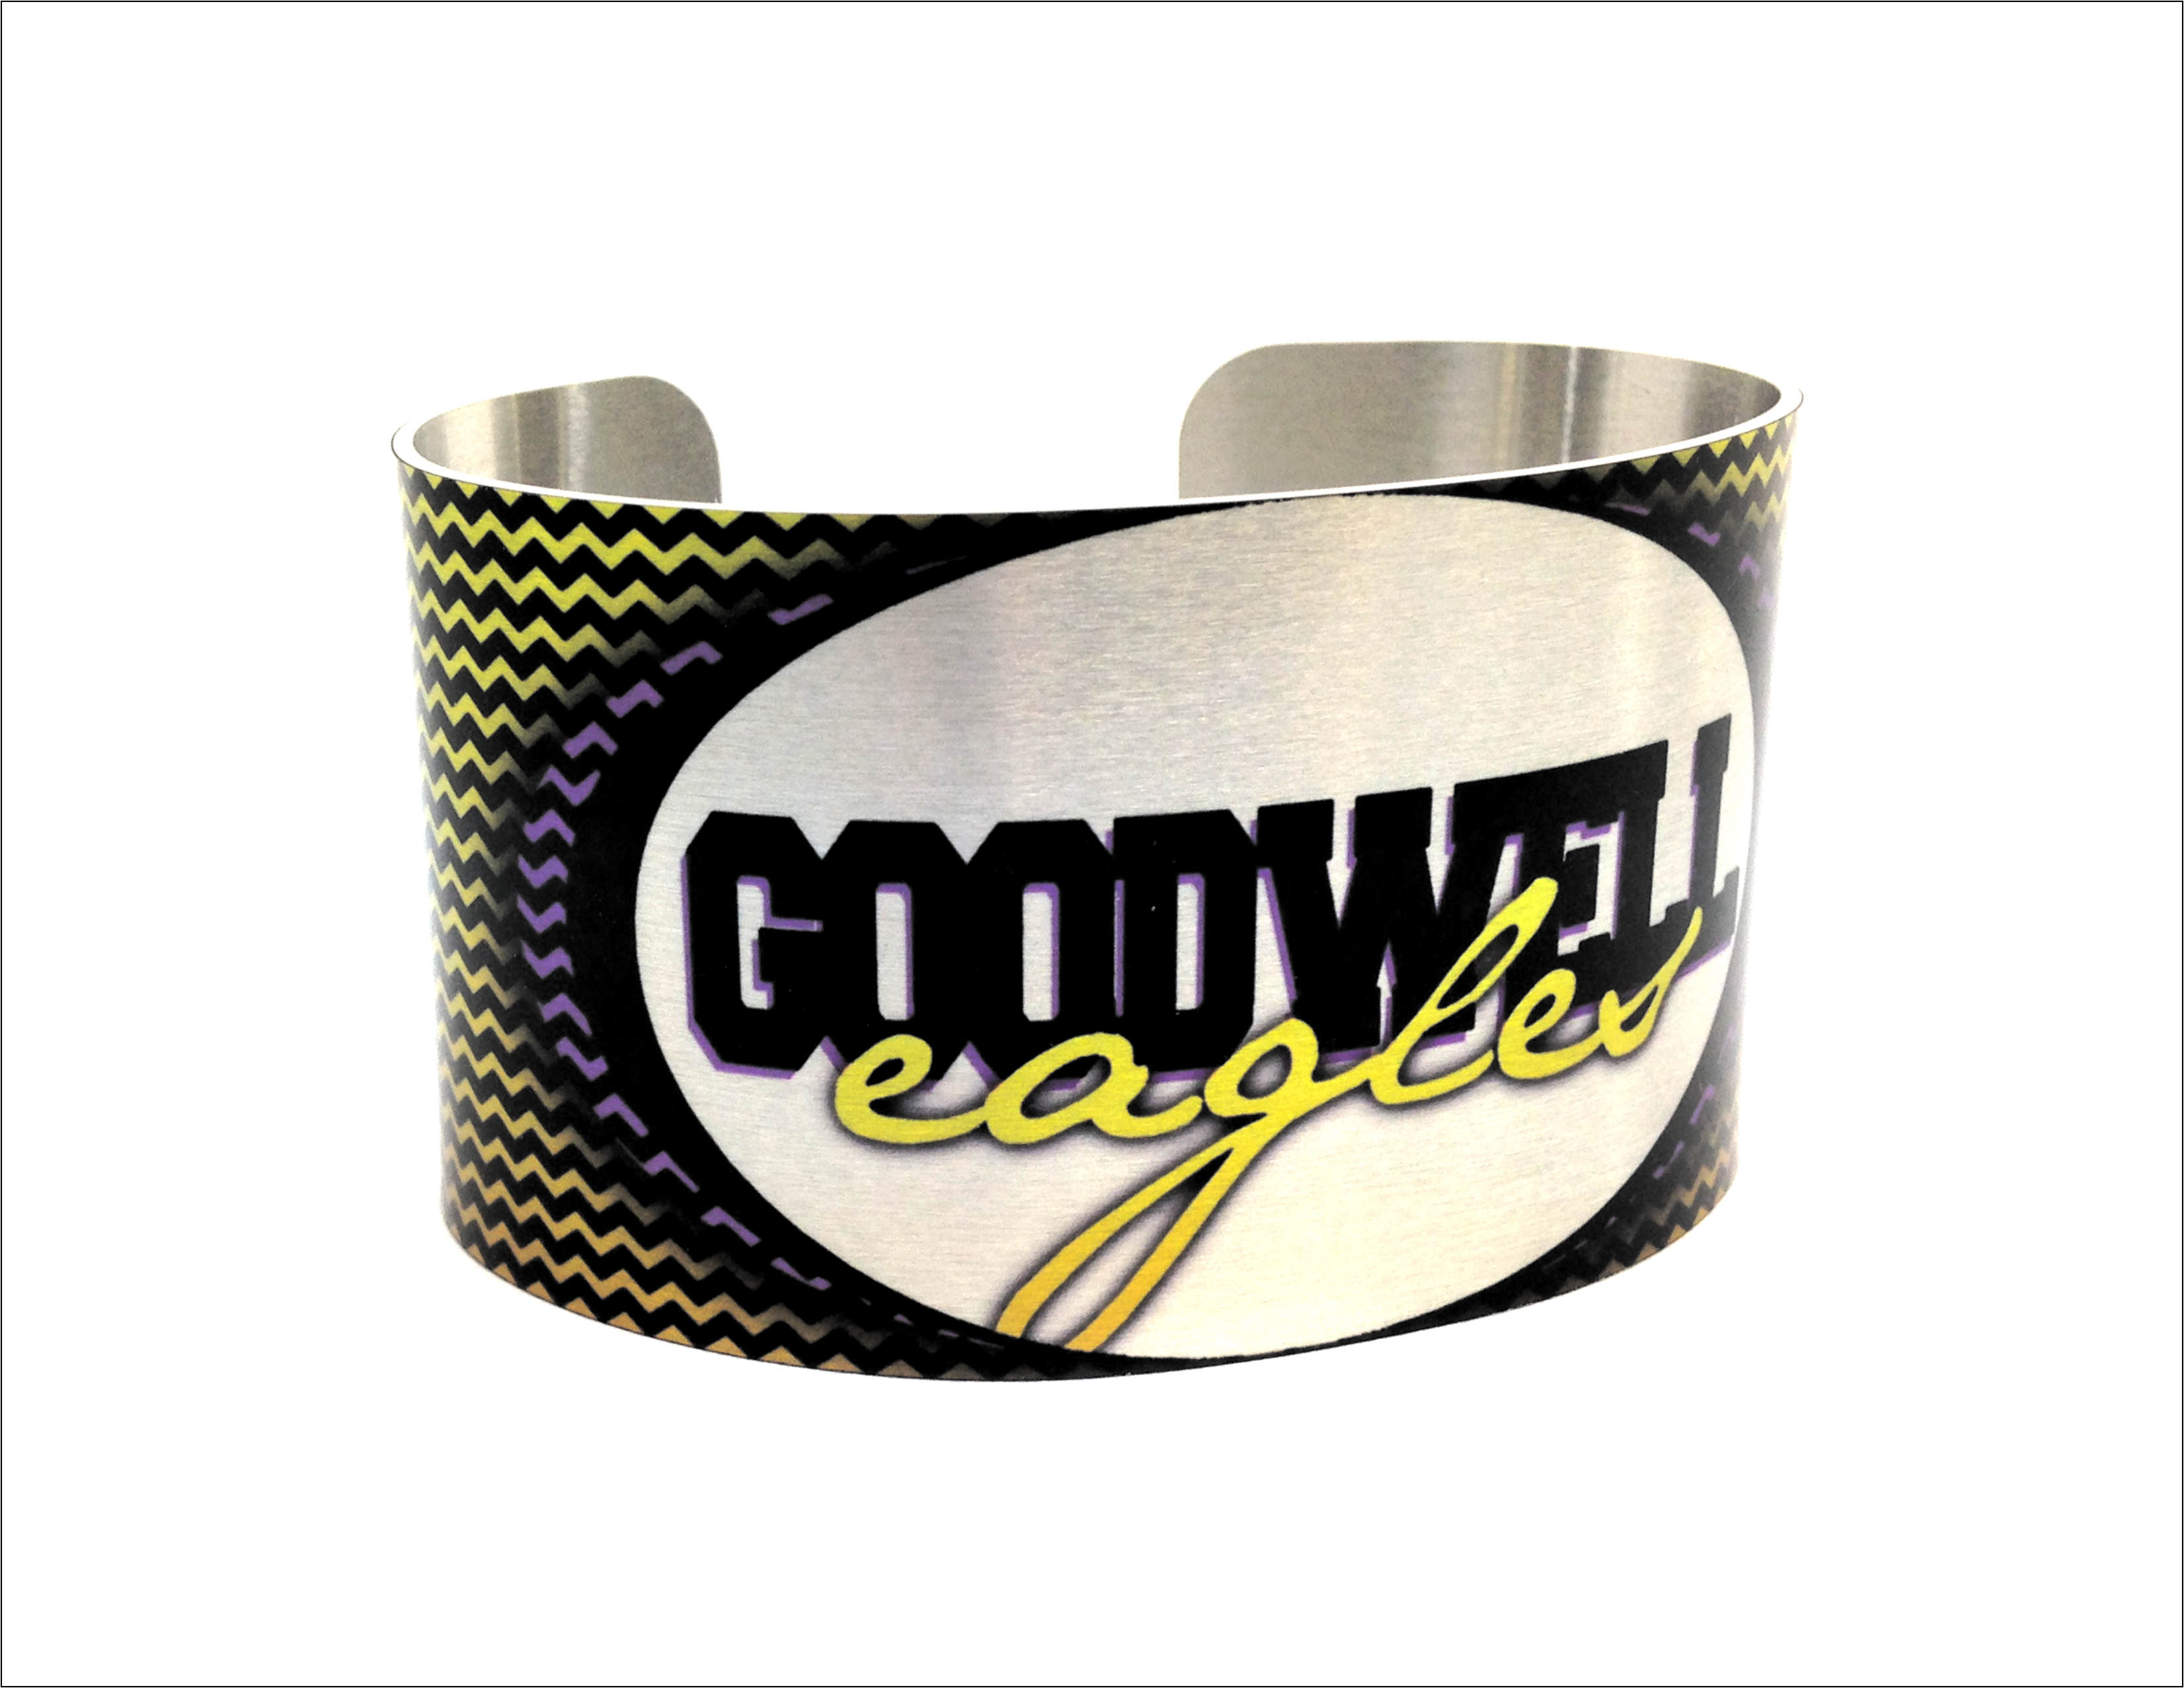 Eagle Large Cuff made with sublimation printing